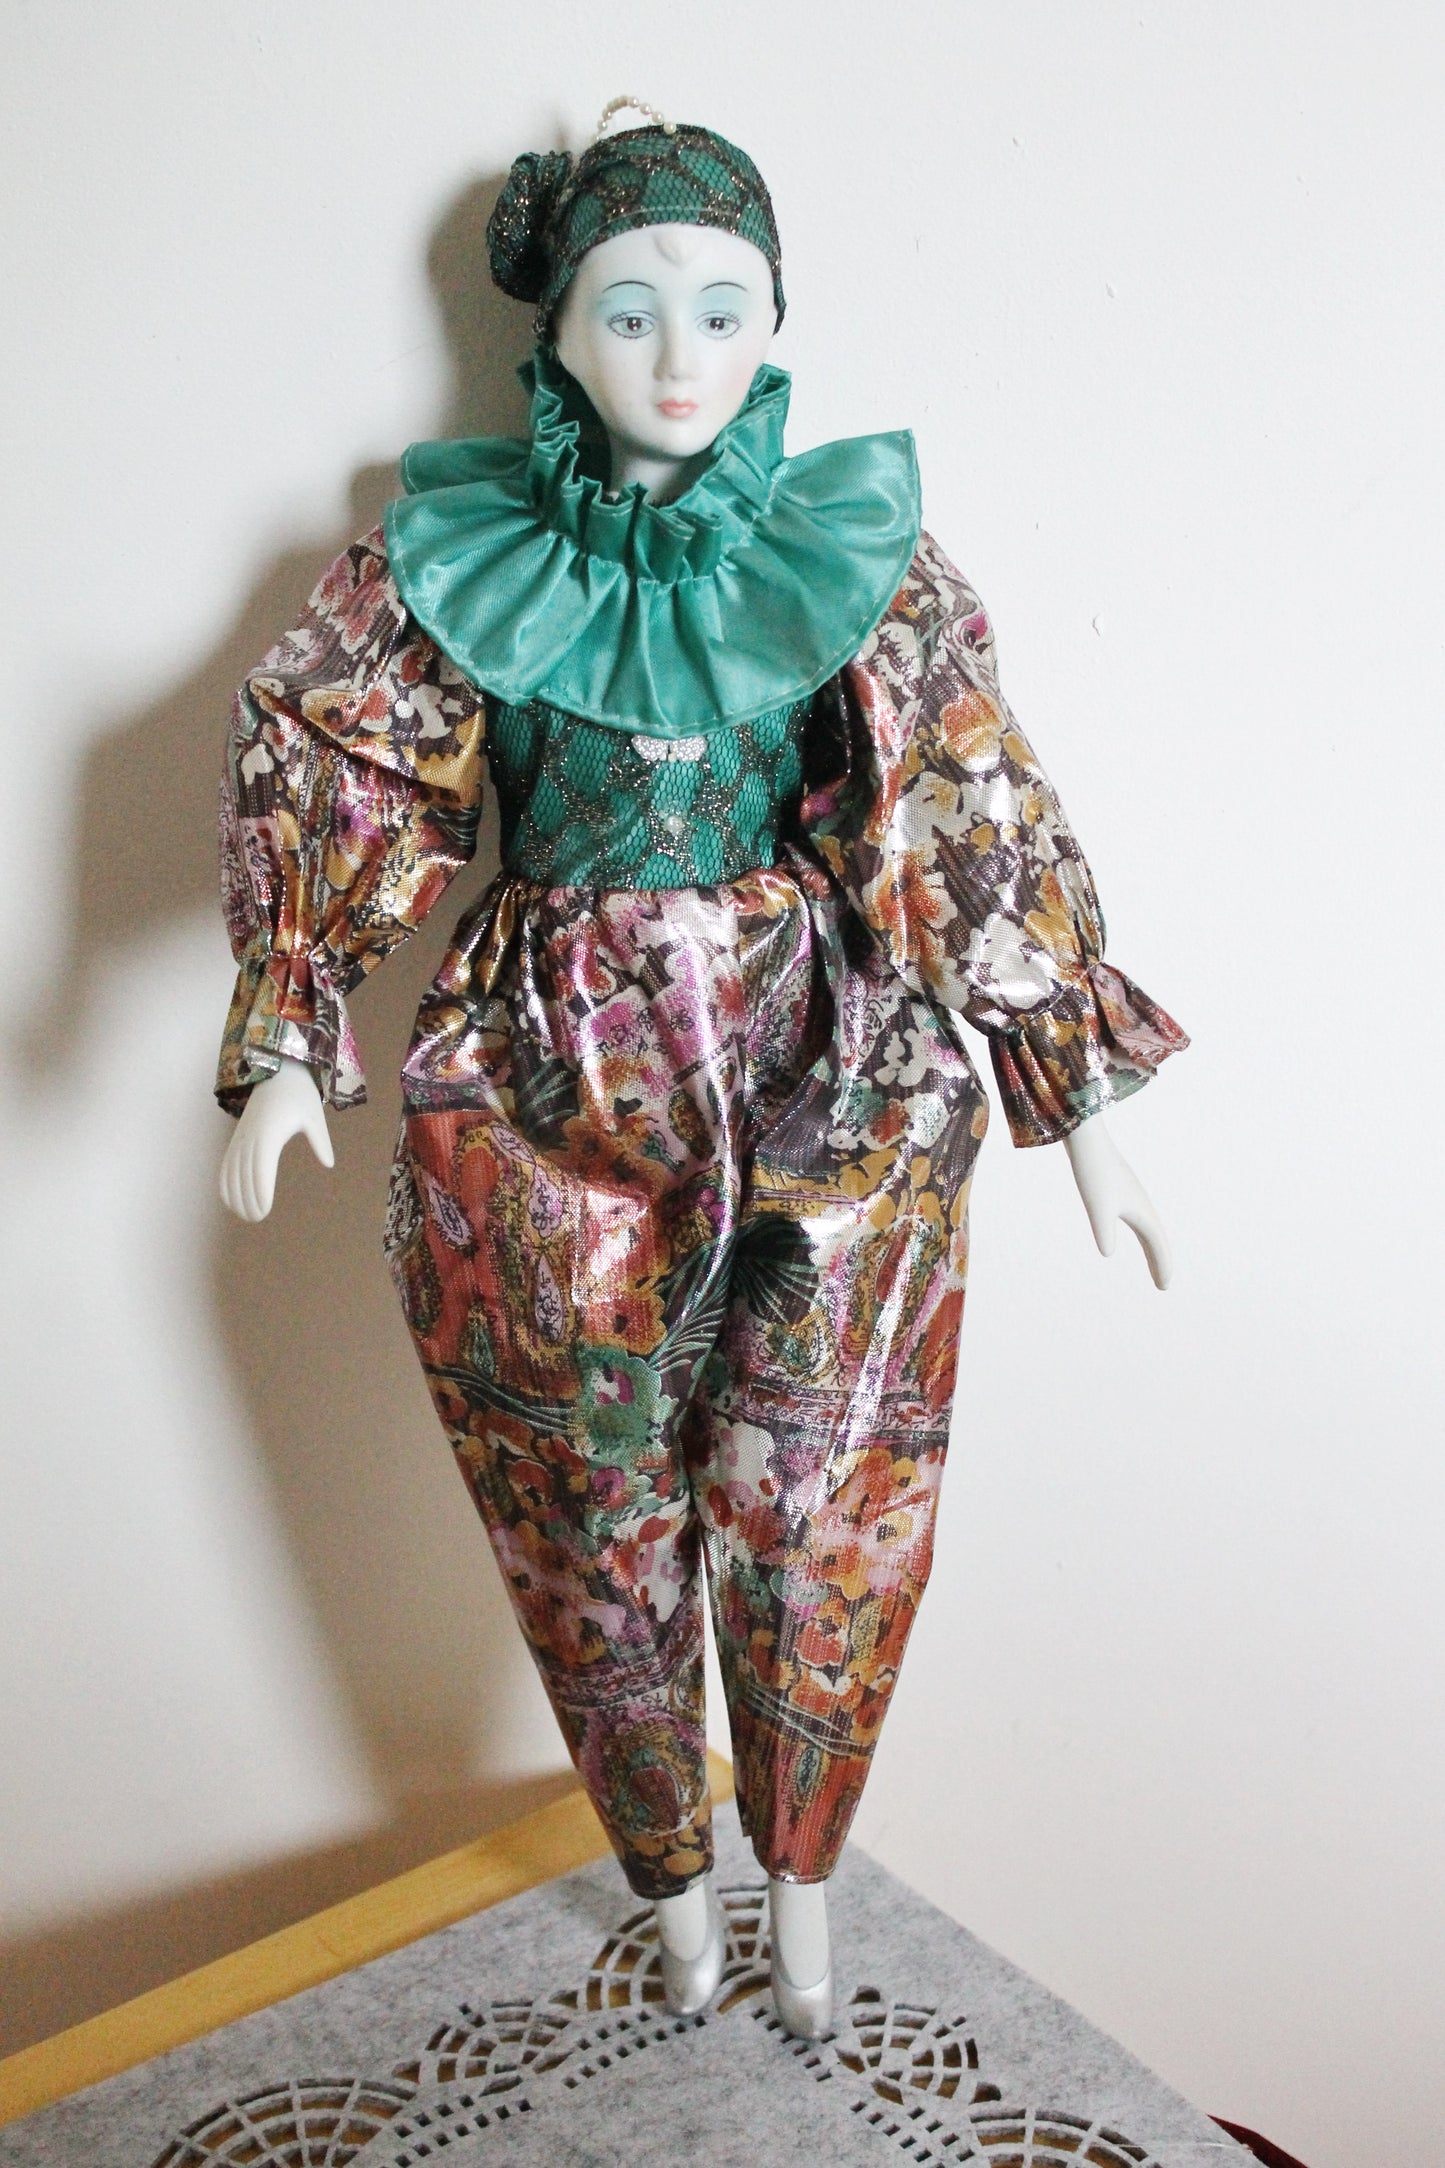 Vintage porcelain Venetian doll - Harlequin - 15.7 inches- collectible doll - porcelain doll - decor doll - 1980s